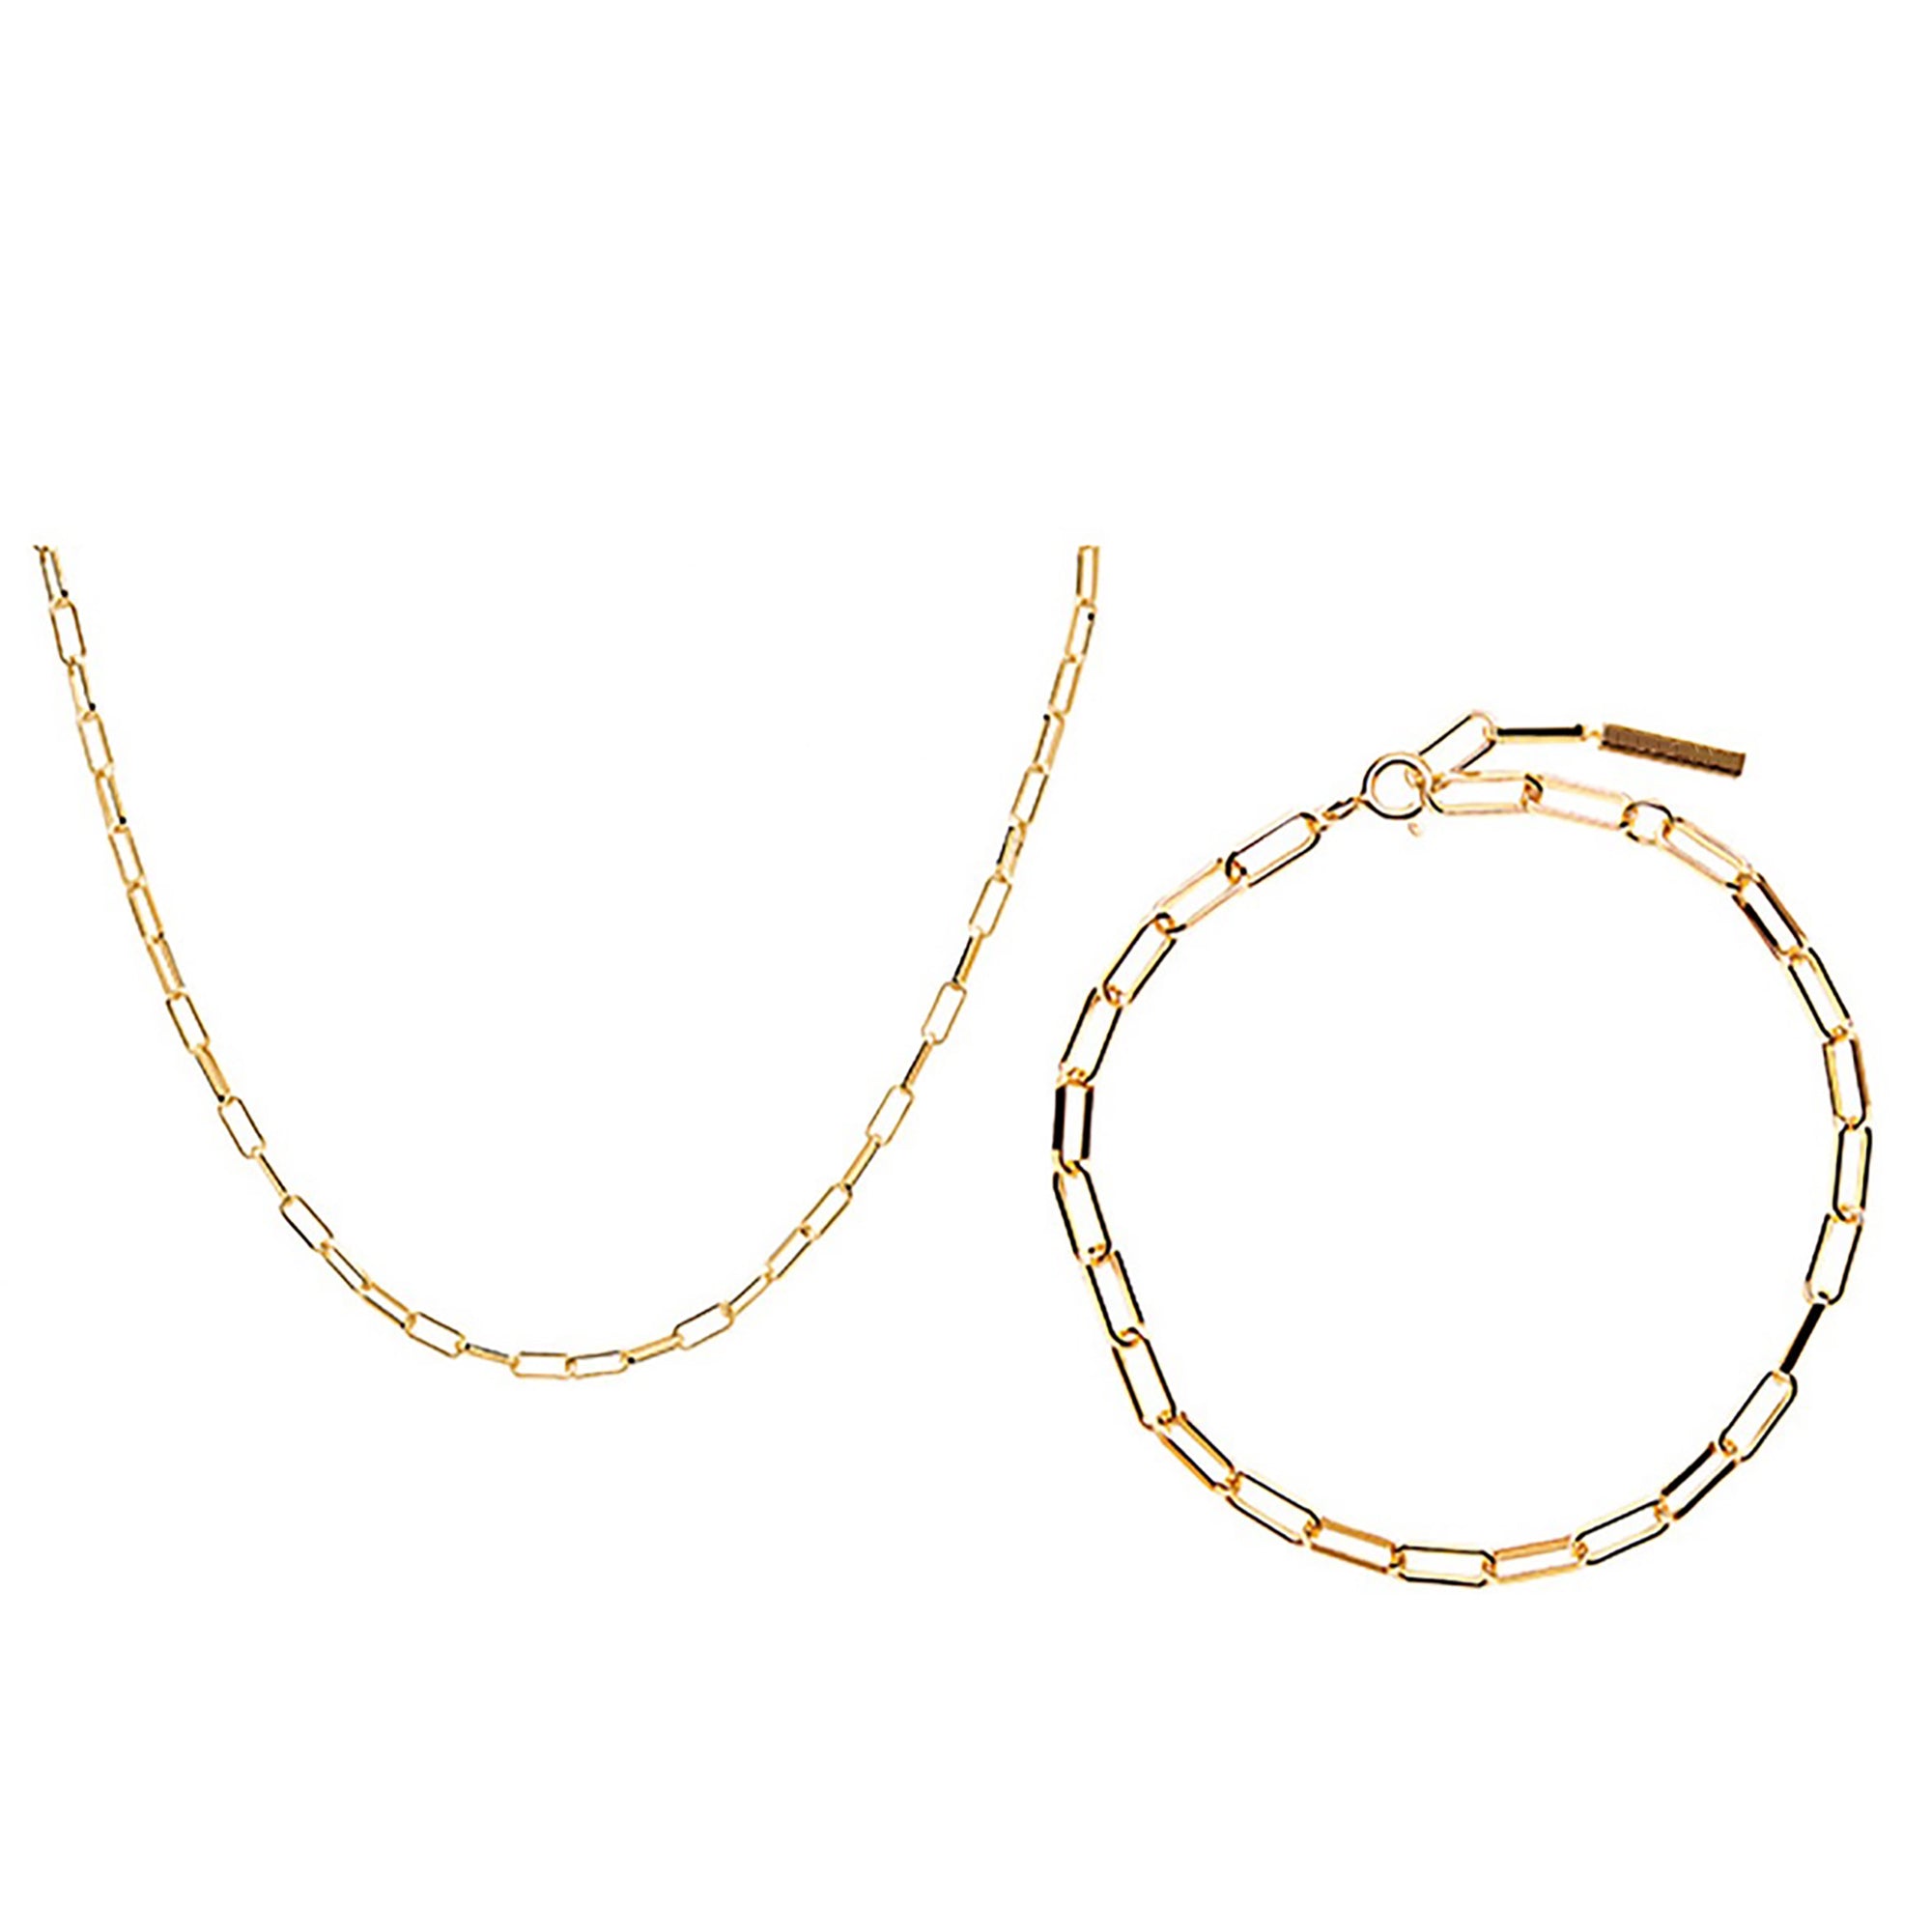 Gold Plated Metal Chain Necklace Bracelet Set Valentine Day Gift KOL / Youtuber / Celebrity / Fashion Icon styling